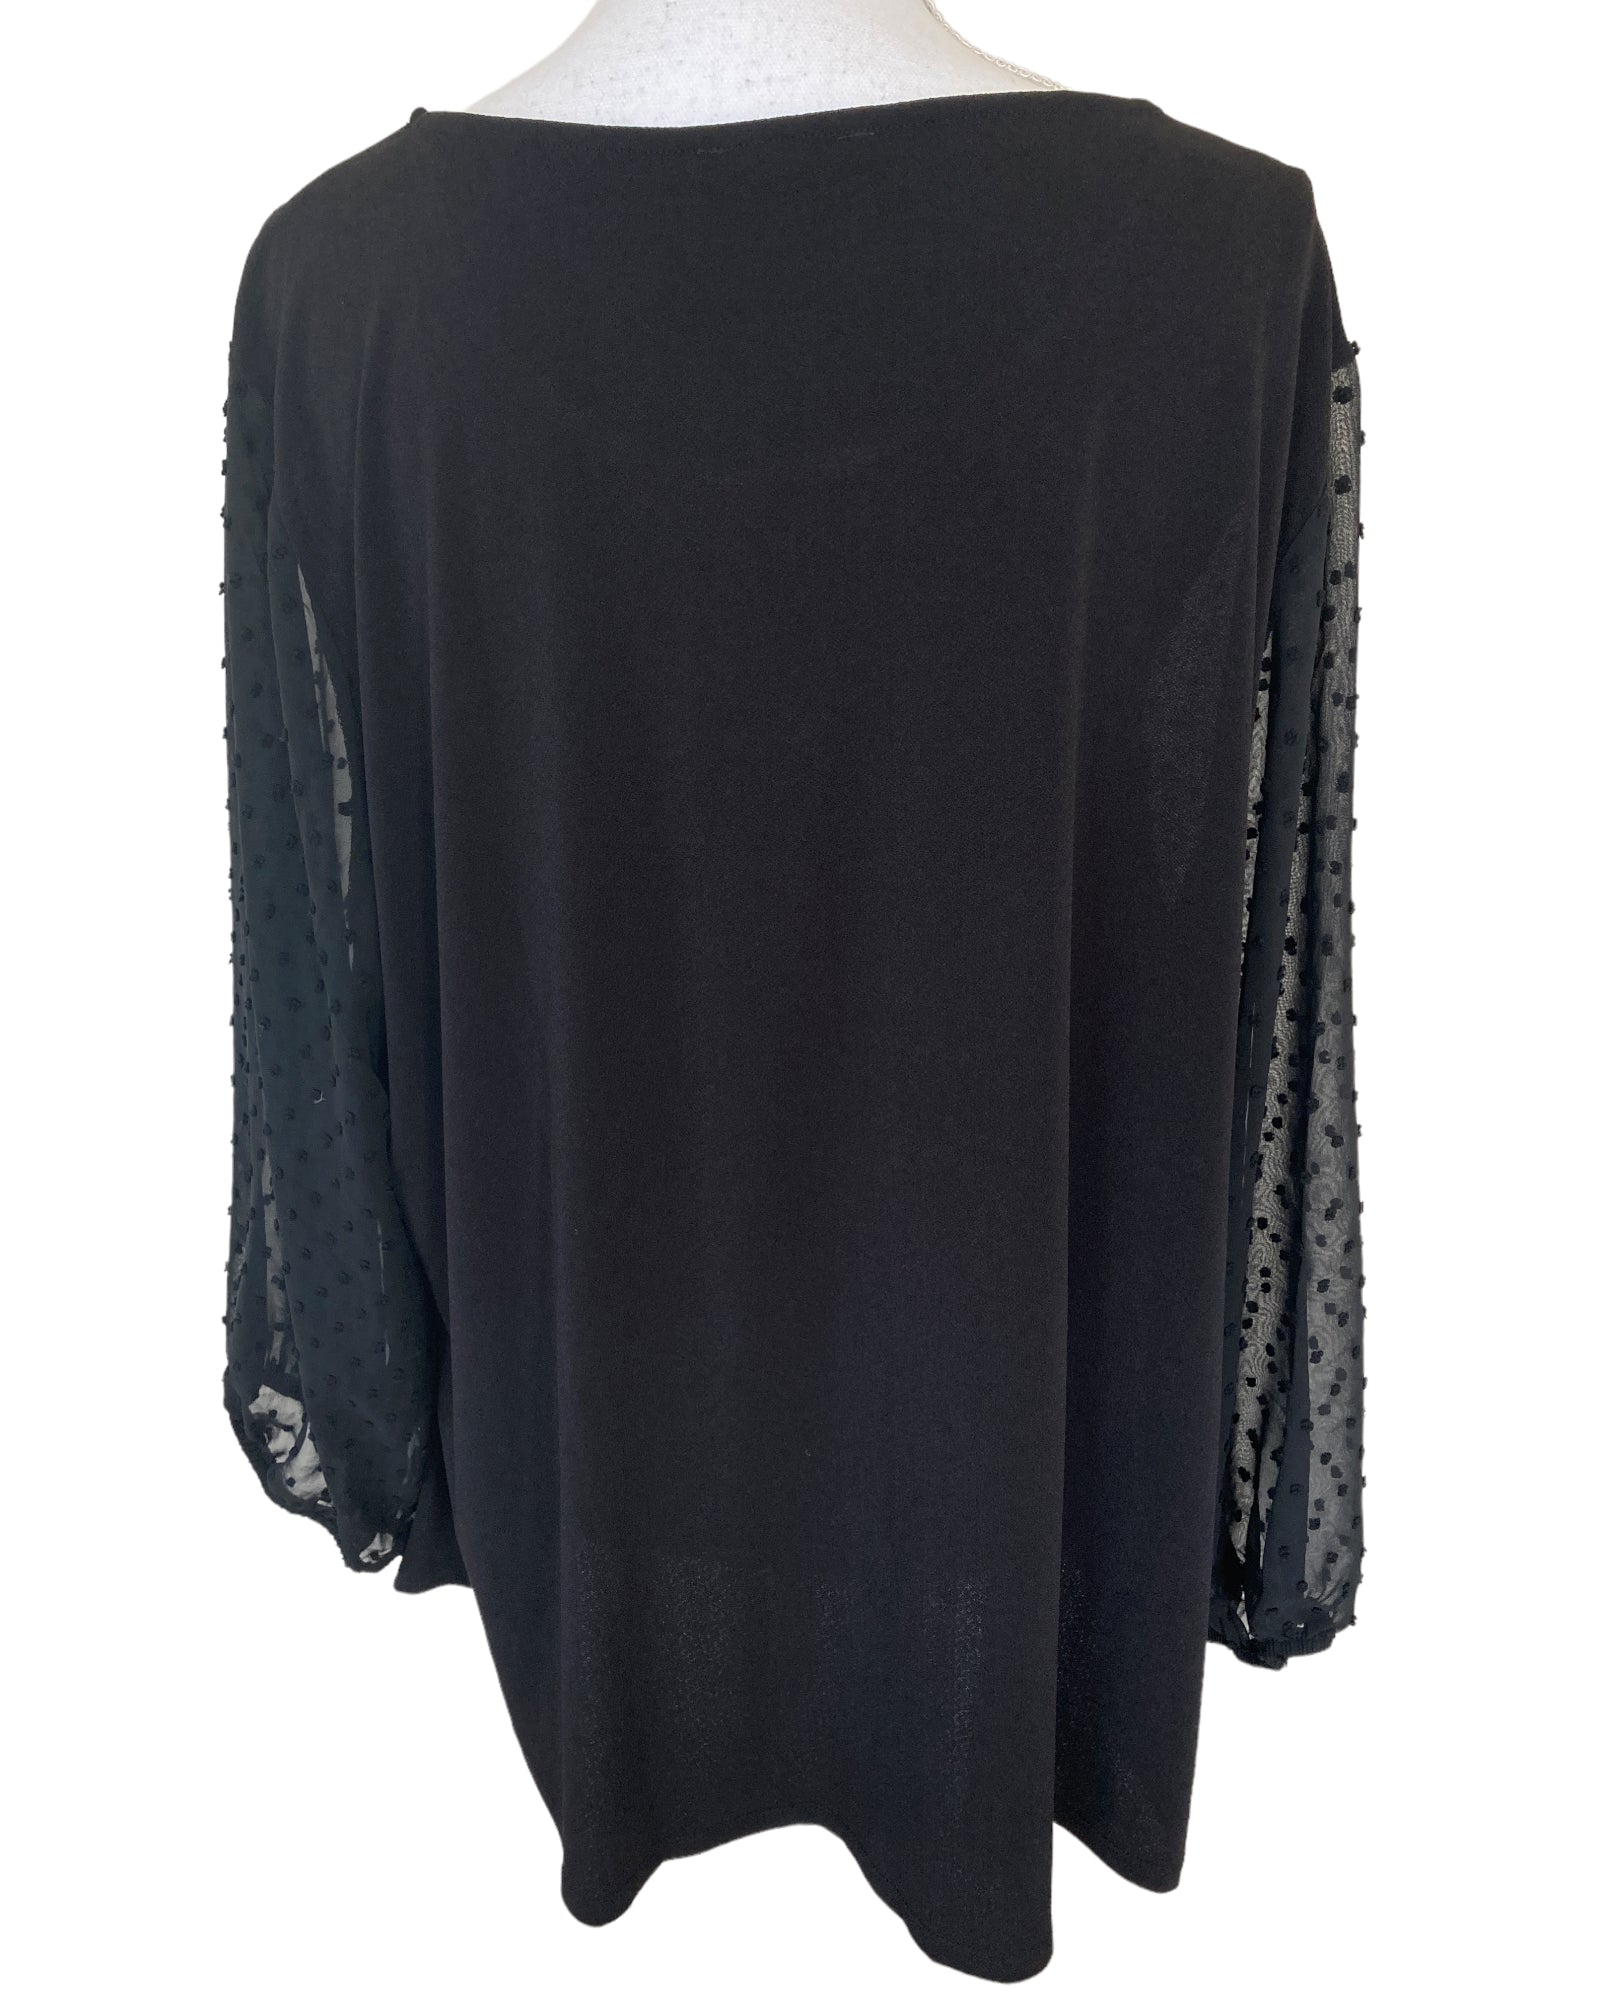 Adrianna Papell Black Blouse with Sheer Sleeves, 3X